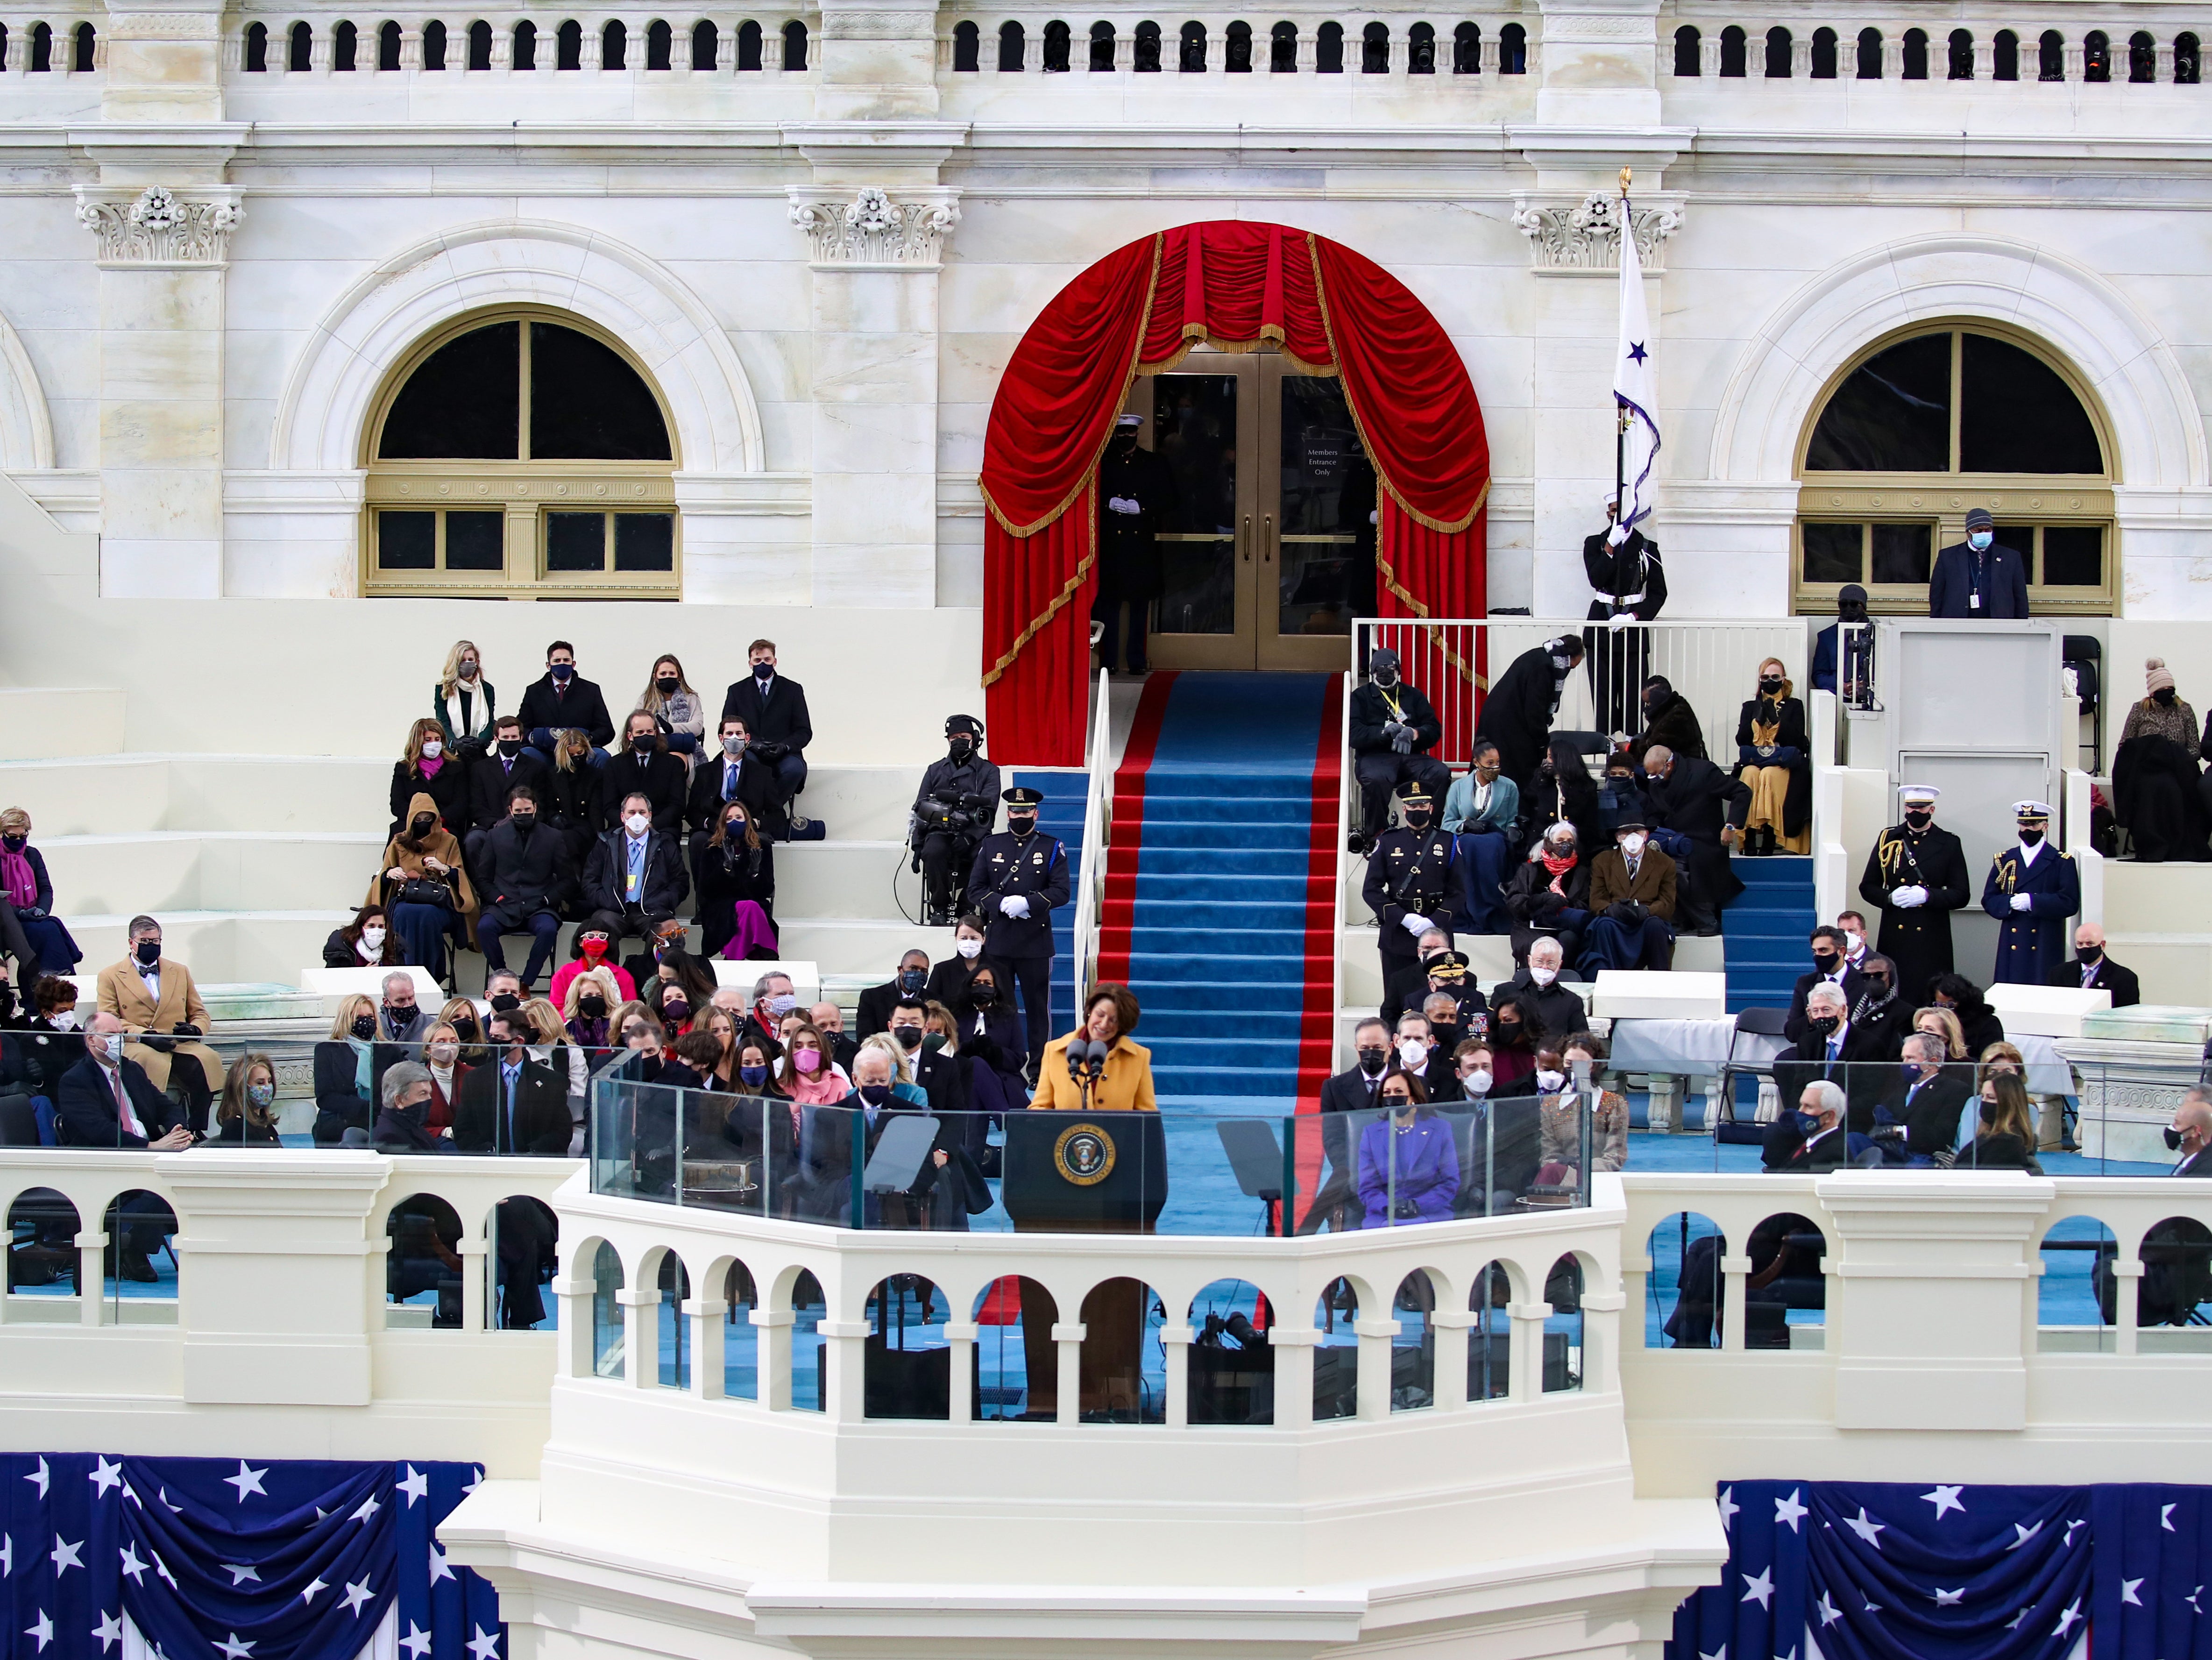 Senator Amy Klobuchar speaks at the inauguration of US President-elect Joe Biden on the West Front of the US Capitol